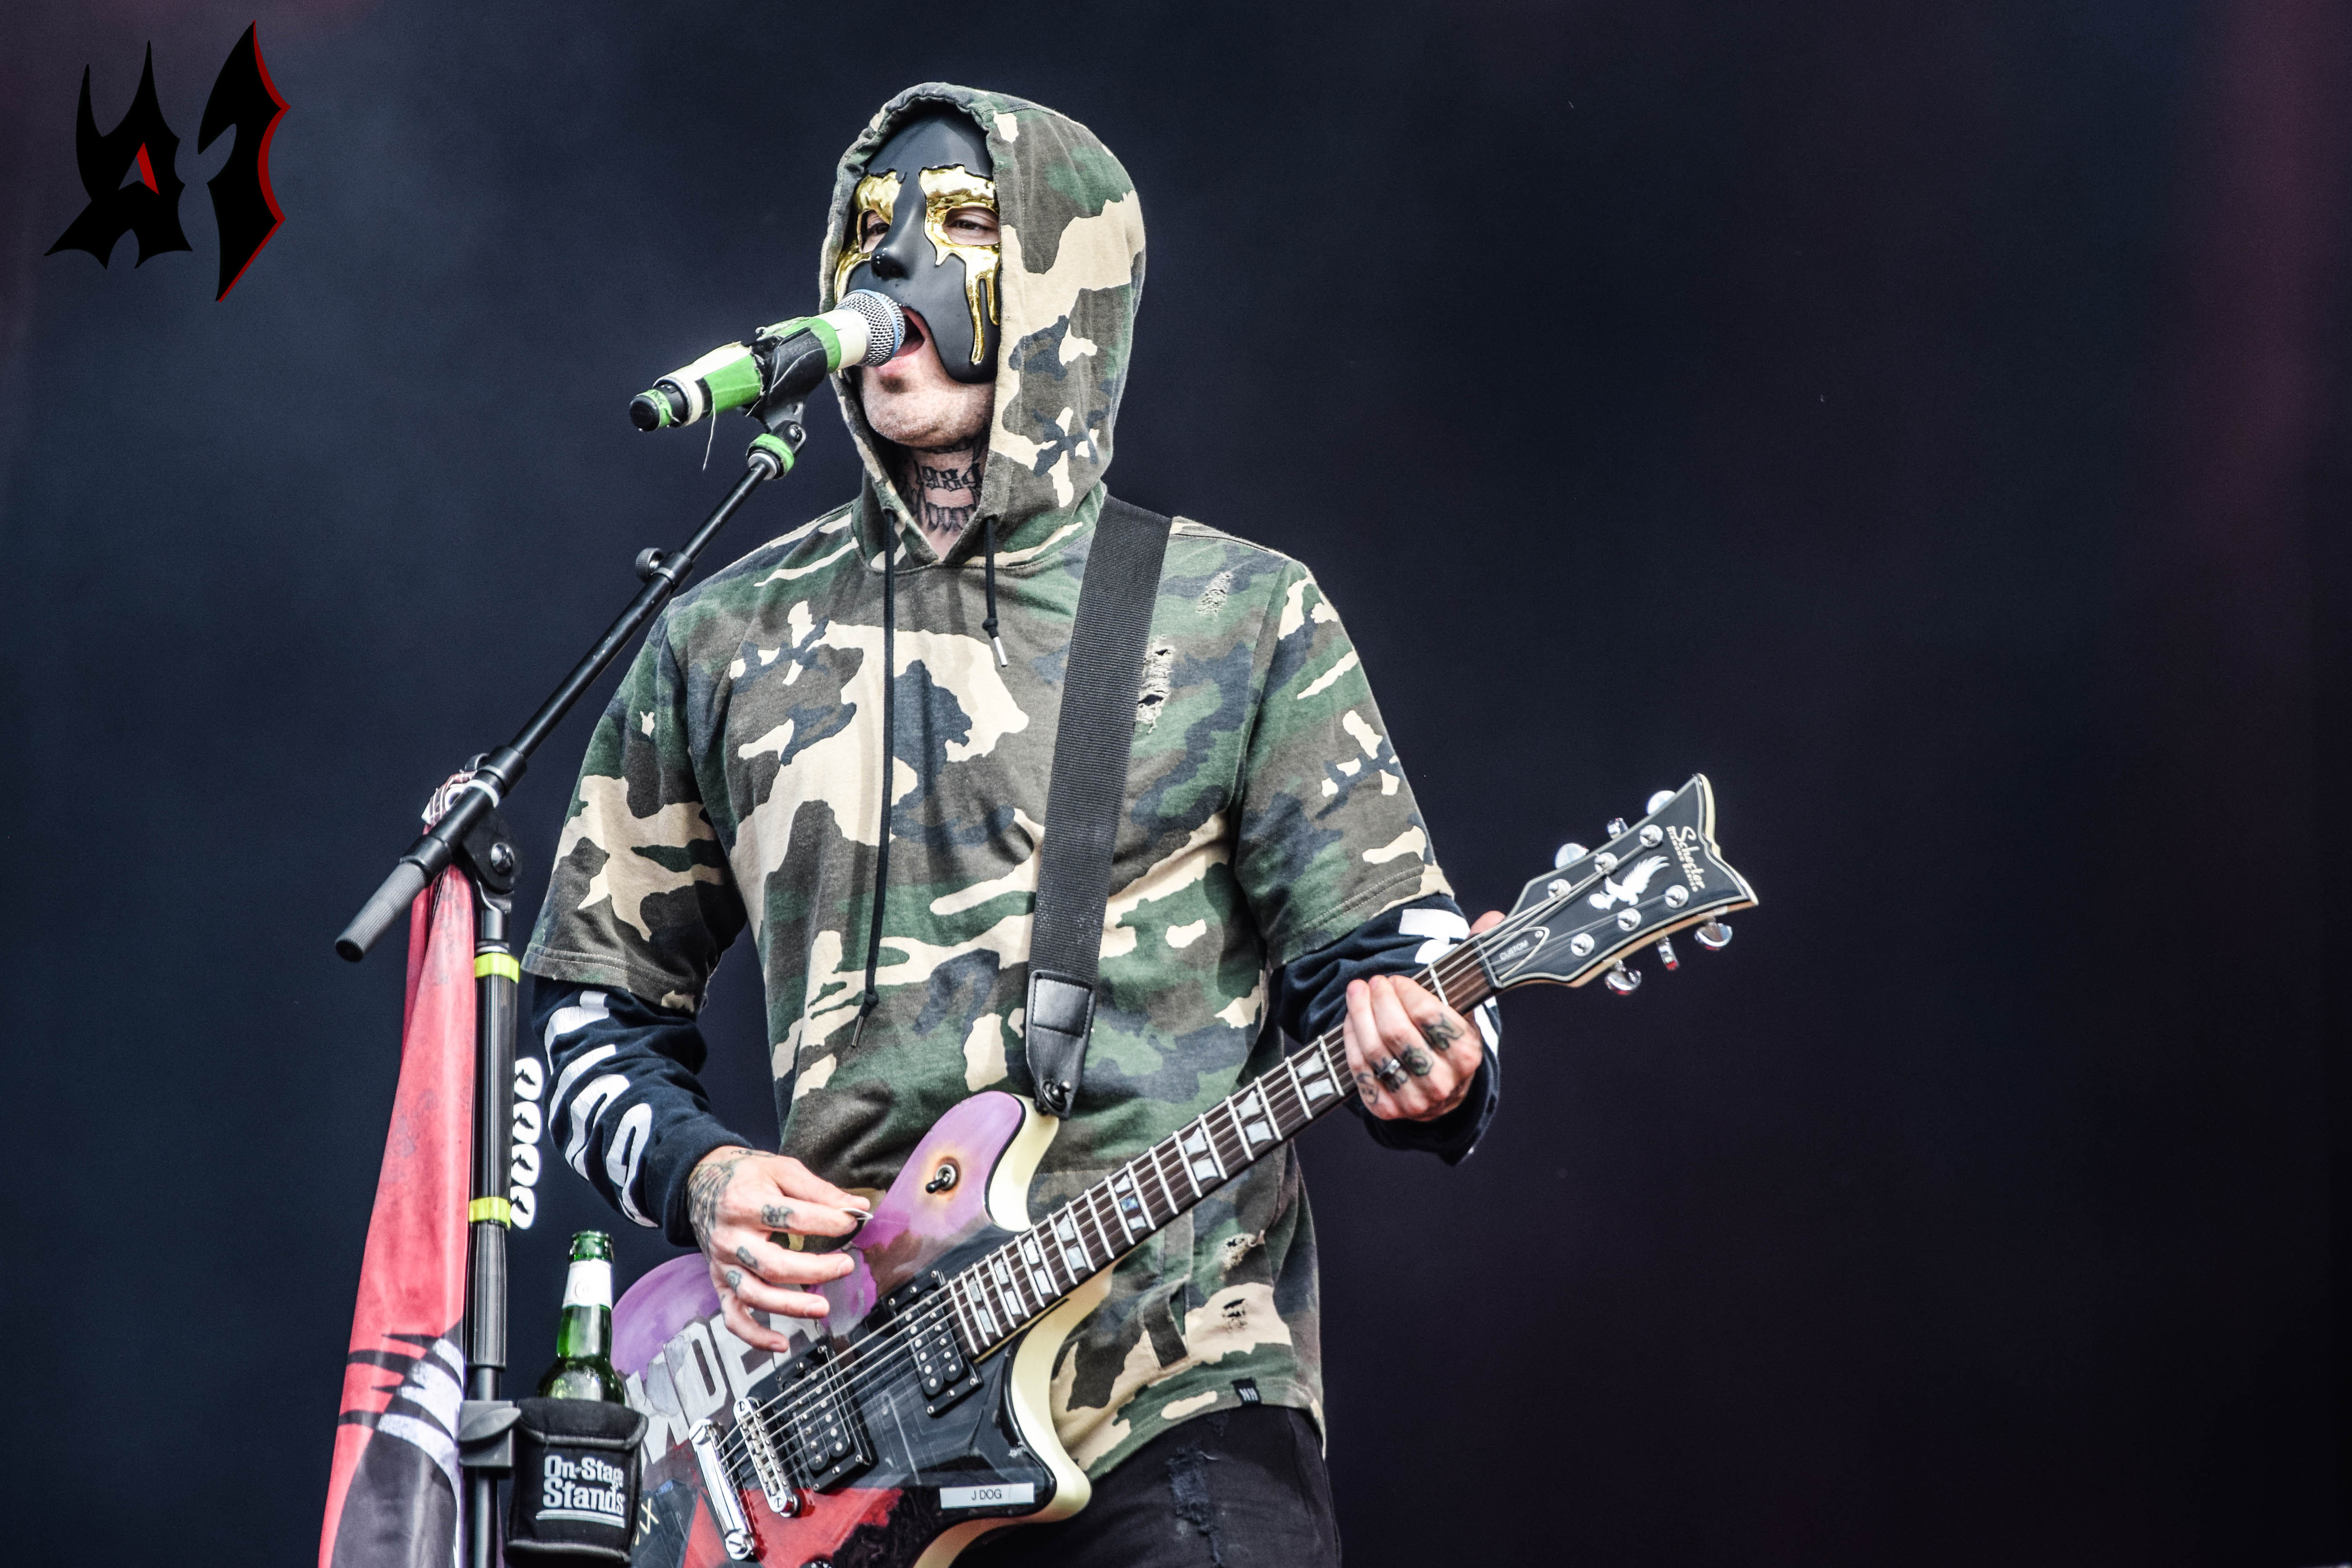 Donwload 2018 – Day 2 - Hollywood Undead 23